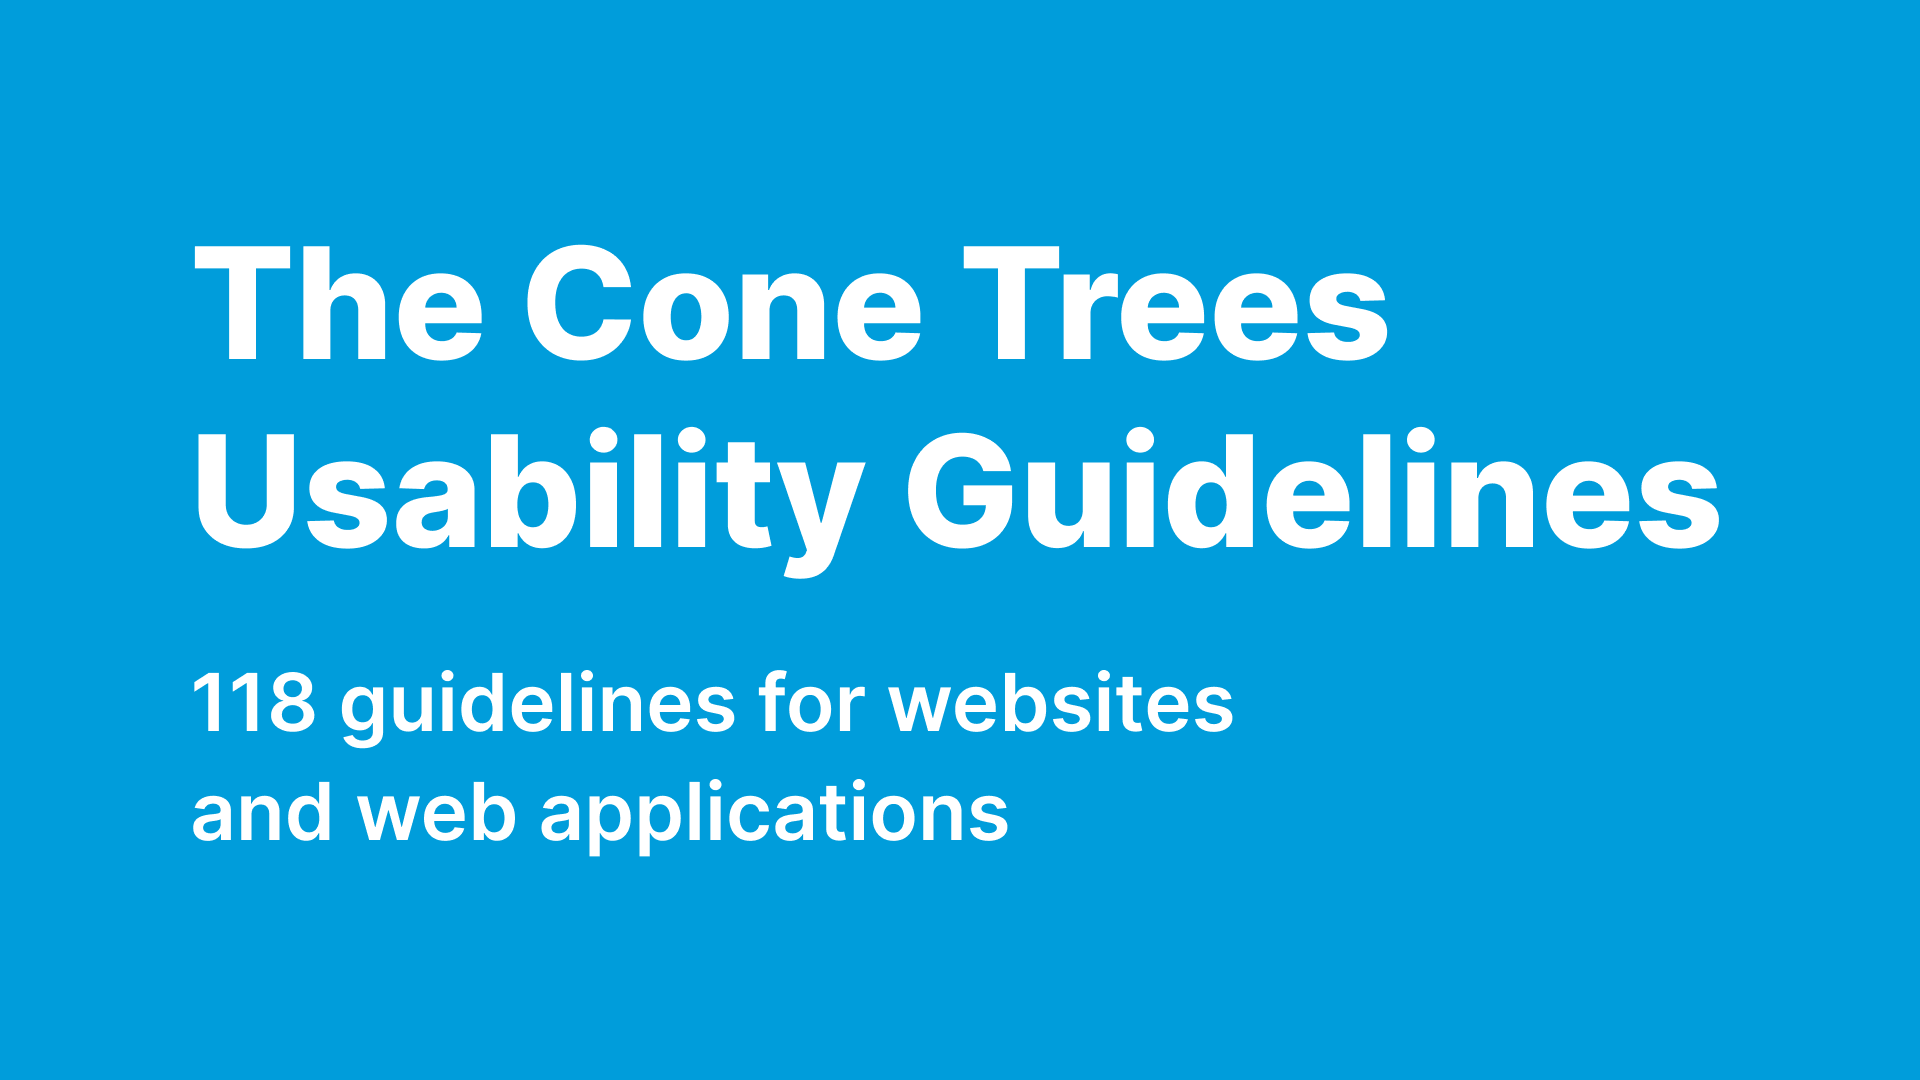 The Cone Trees Usability Guidelines for Websites and Web Applications (118 Guidelines)